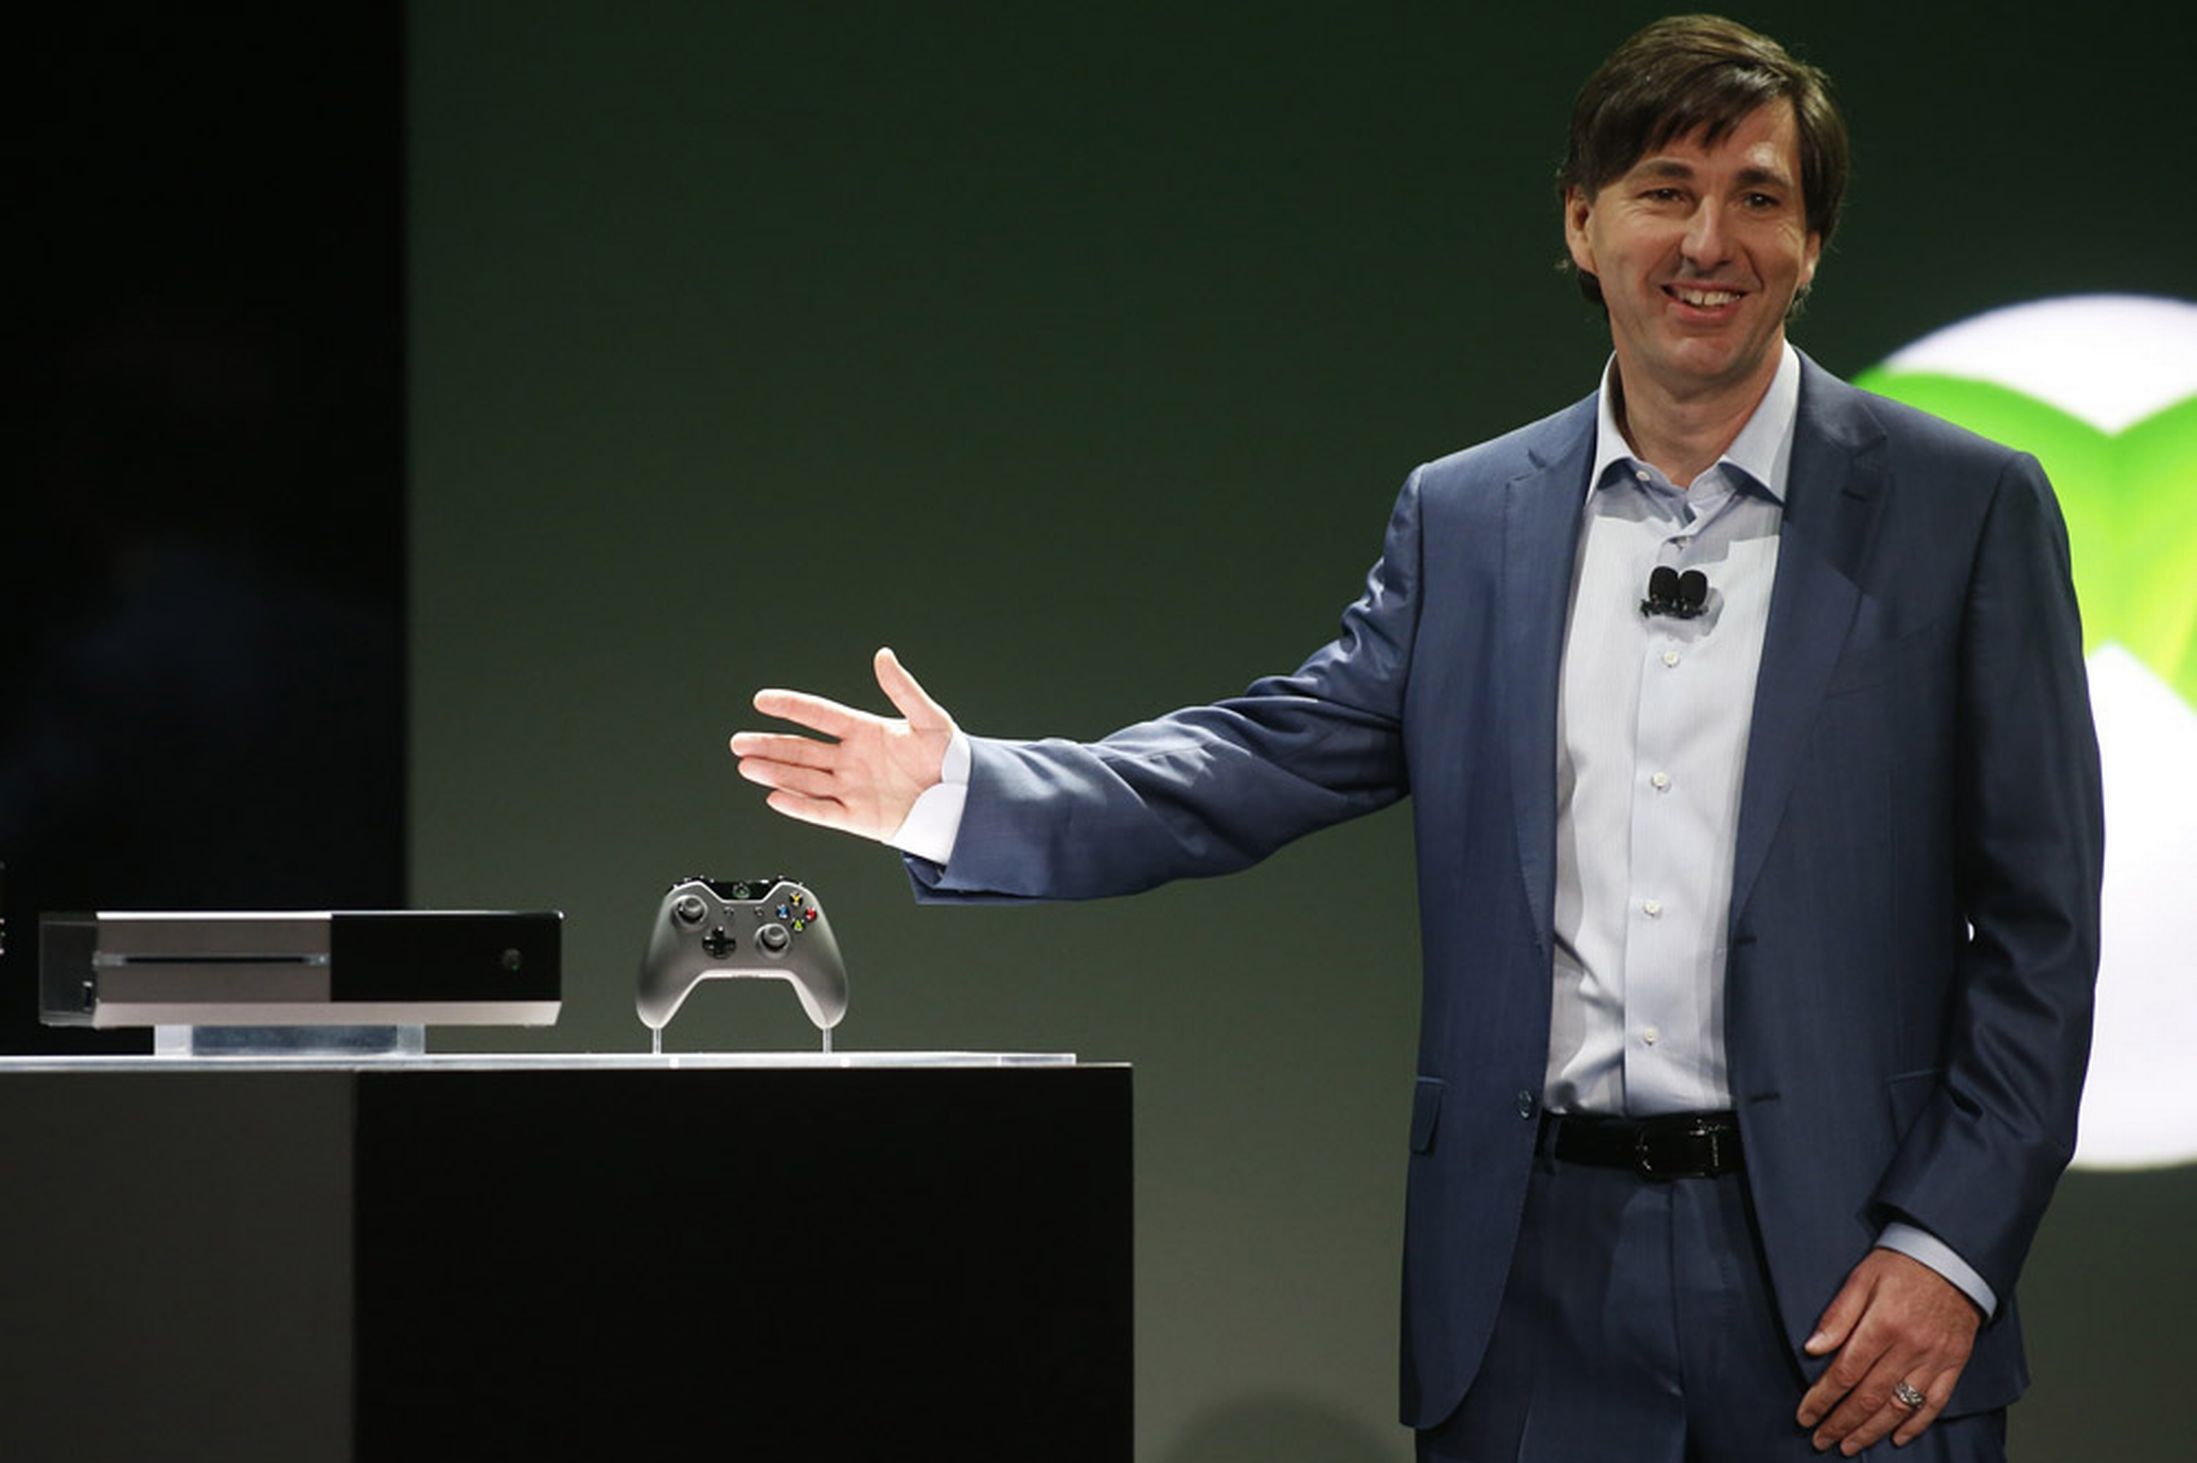 Don-Mattrick-President-of-the-Interactive-Entertainment-Business-at-Microsoft-reveals-the-Xbox-One-1903230.jpg